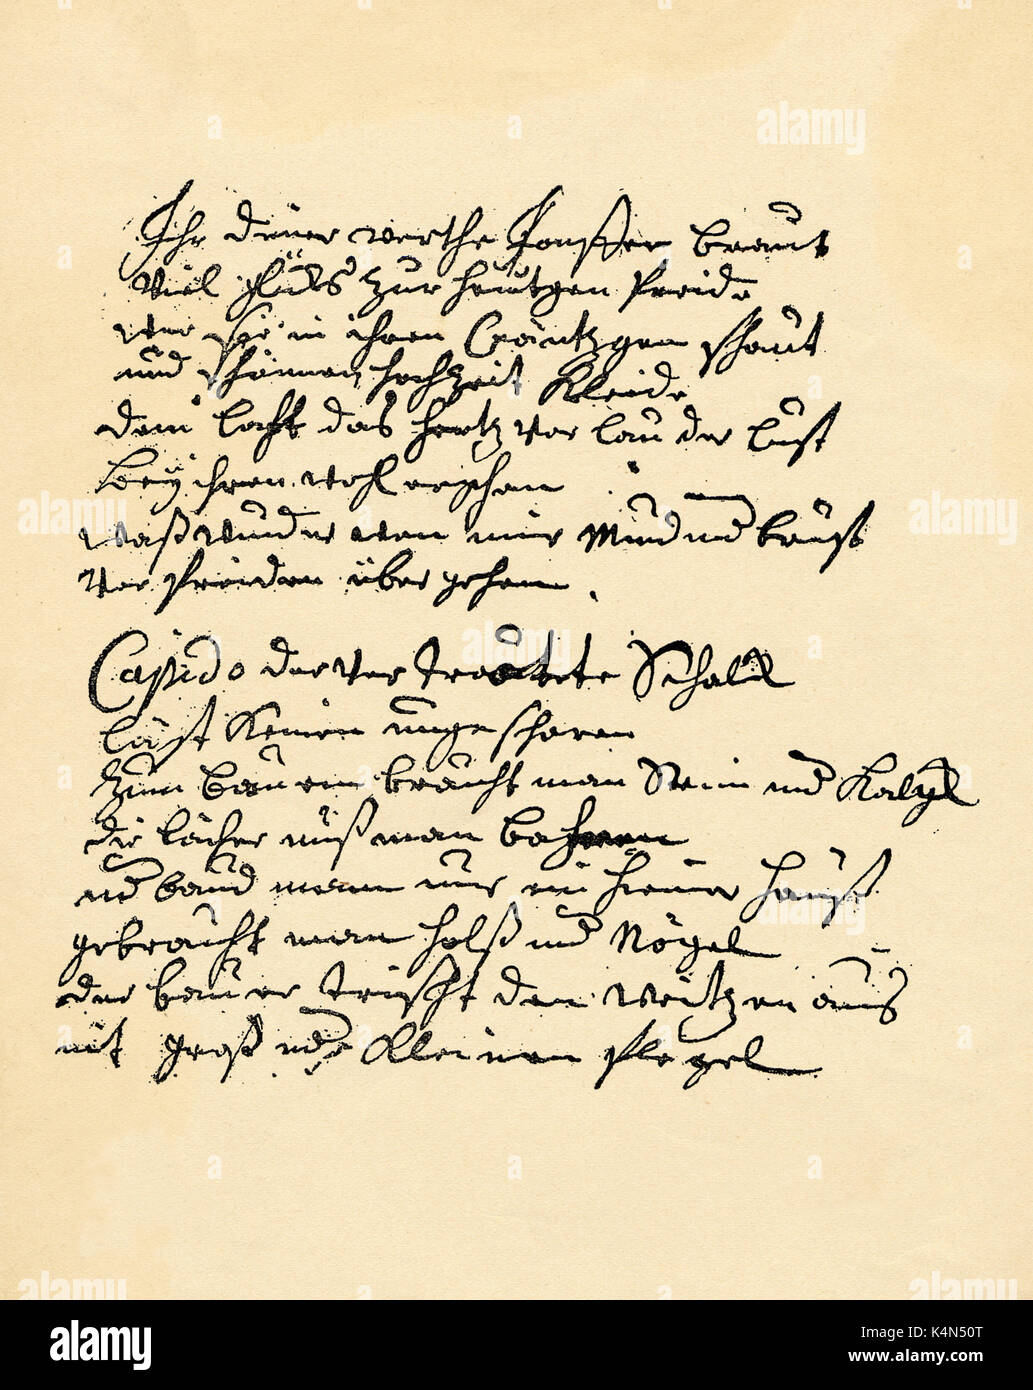 BACH, Johann  Sebastian  - poem to his bride handwritten poem from Bach to his bride - possibly 2nd wife - Anna Magdalena Wilcke.  German composer & organist, 21 March 1685-28th July 1750 Stock Photo